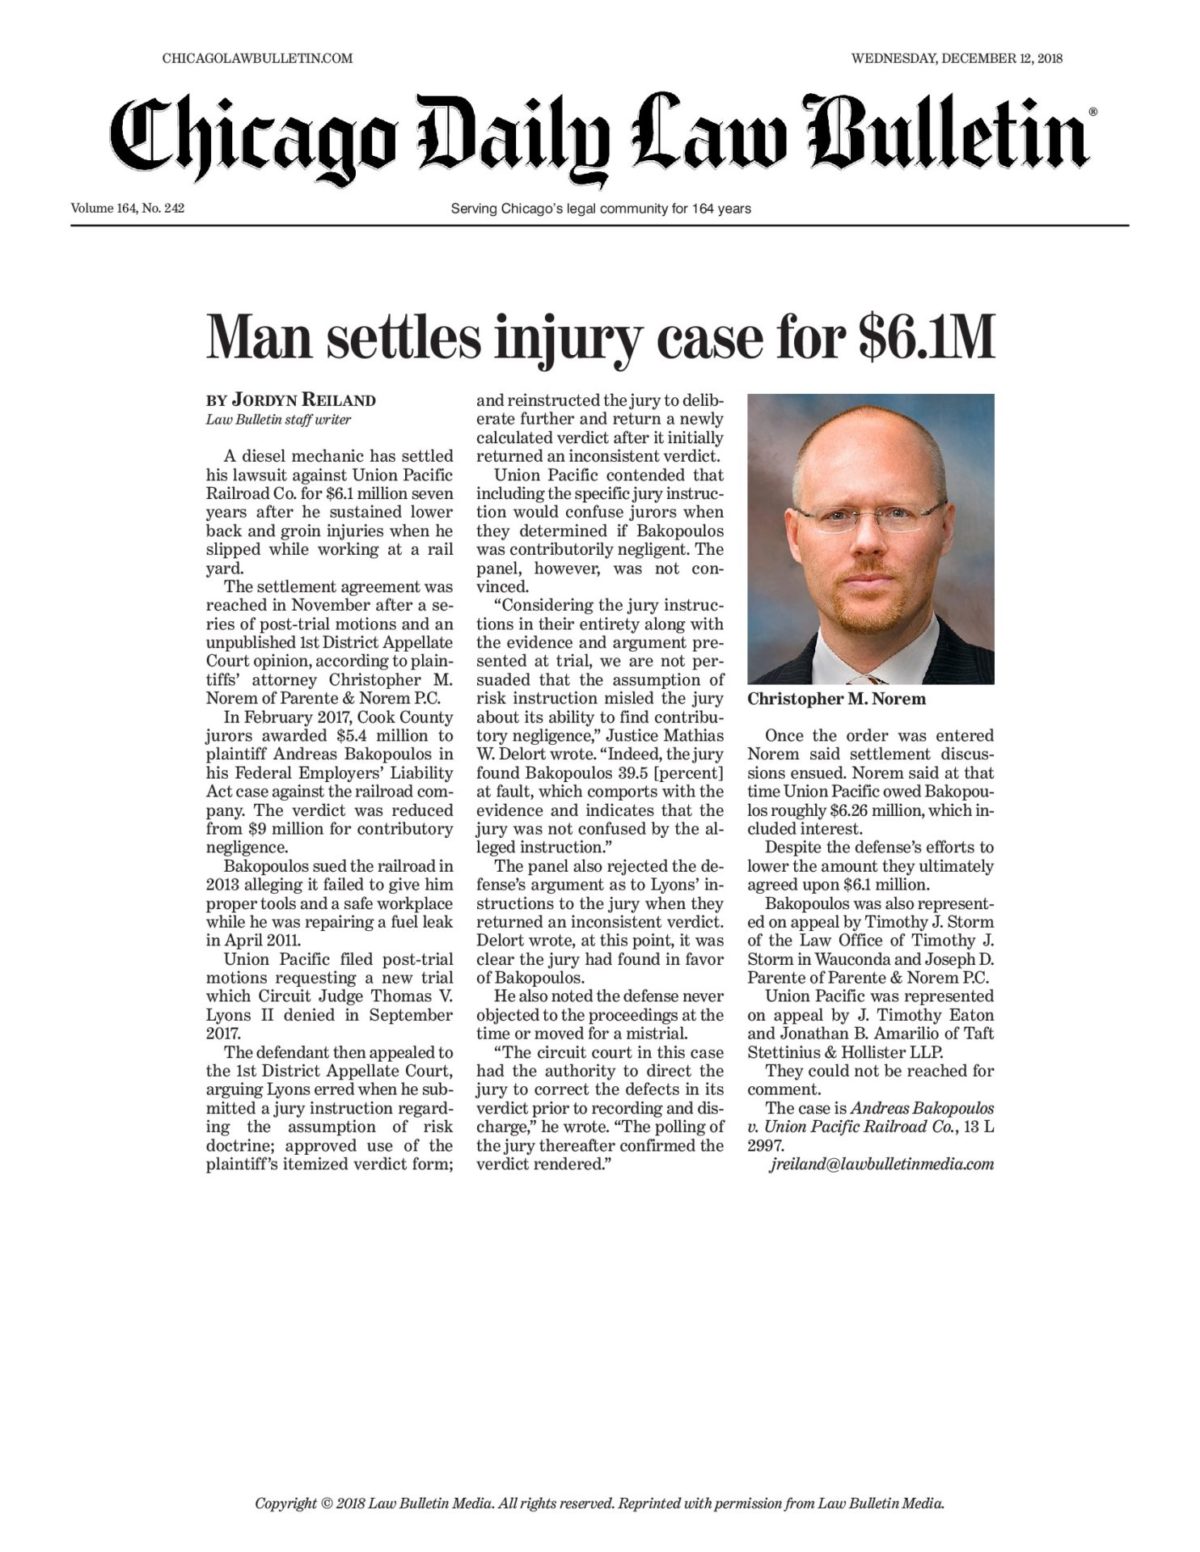 Man settles injury case for $6.1M, including $700K in post judgment interest, after the verdict was affirmed by the Appellate court.